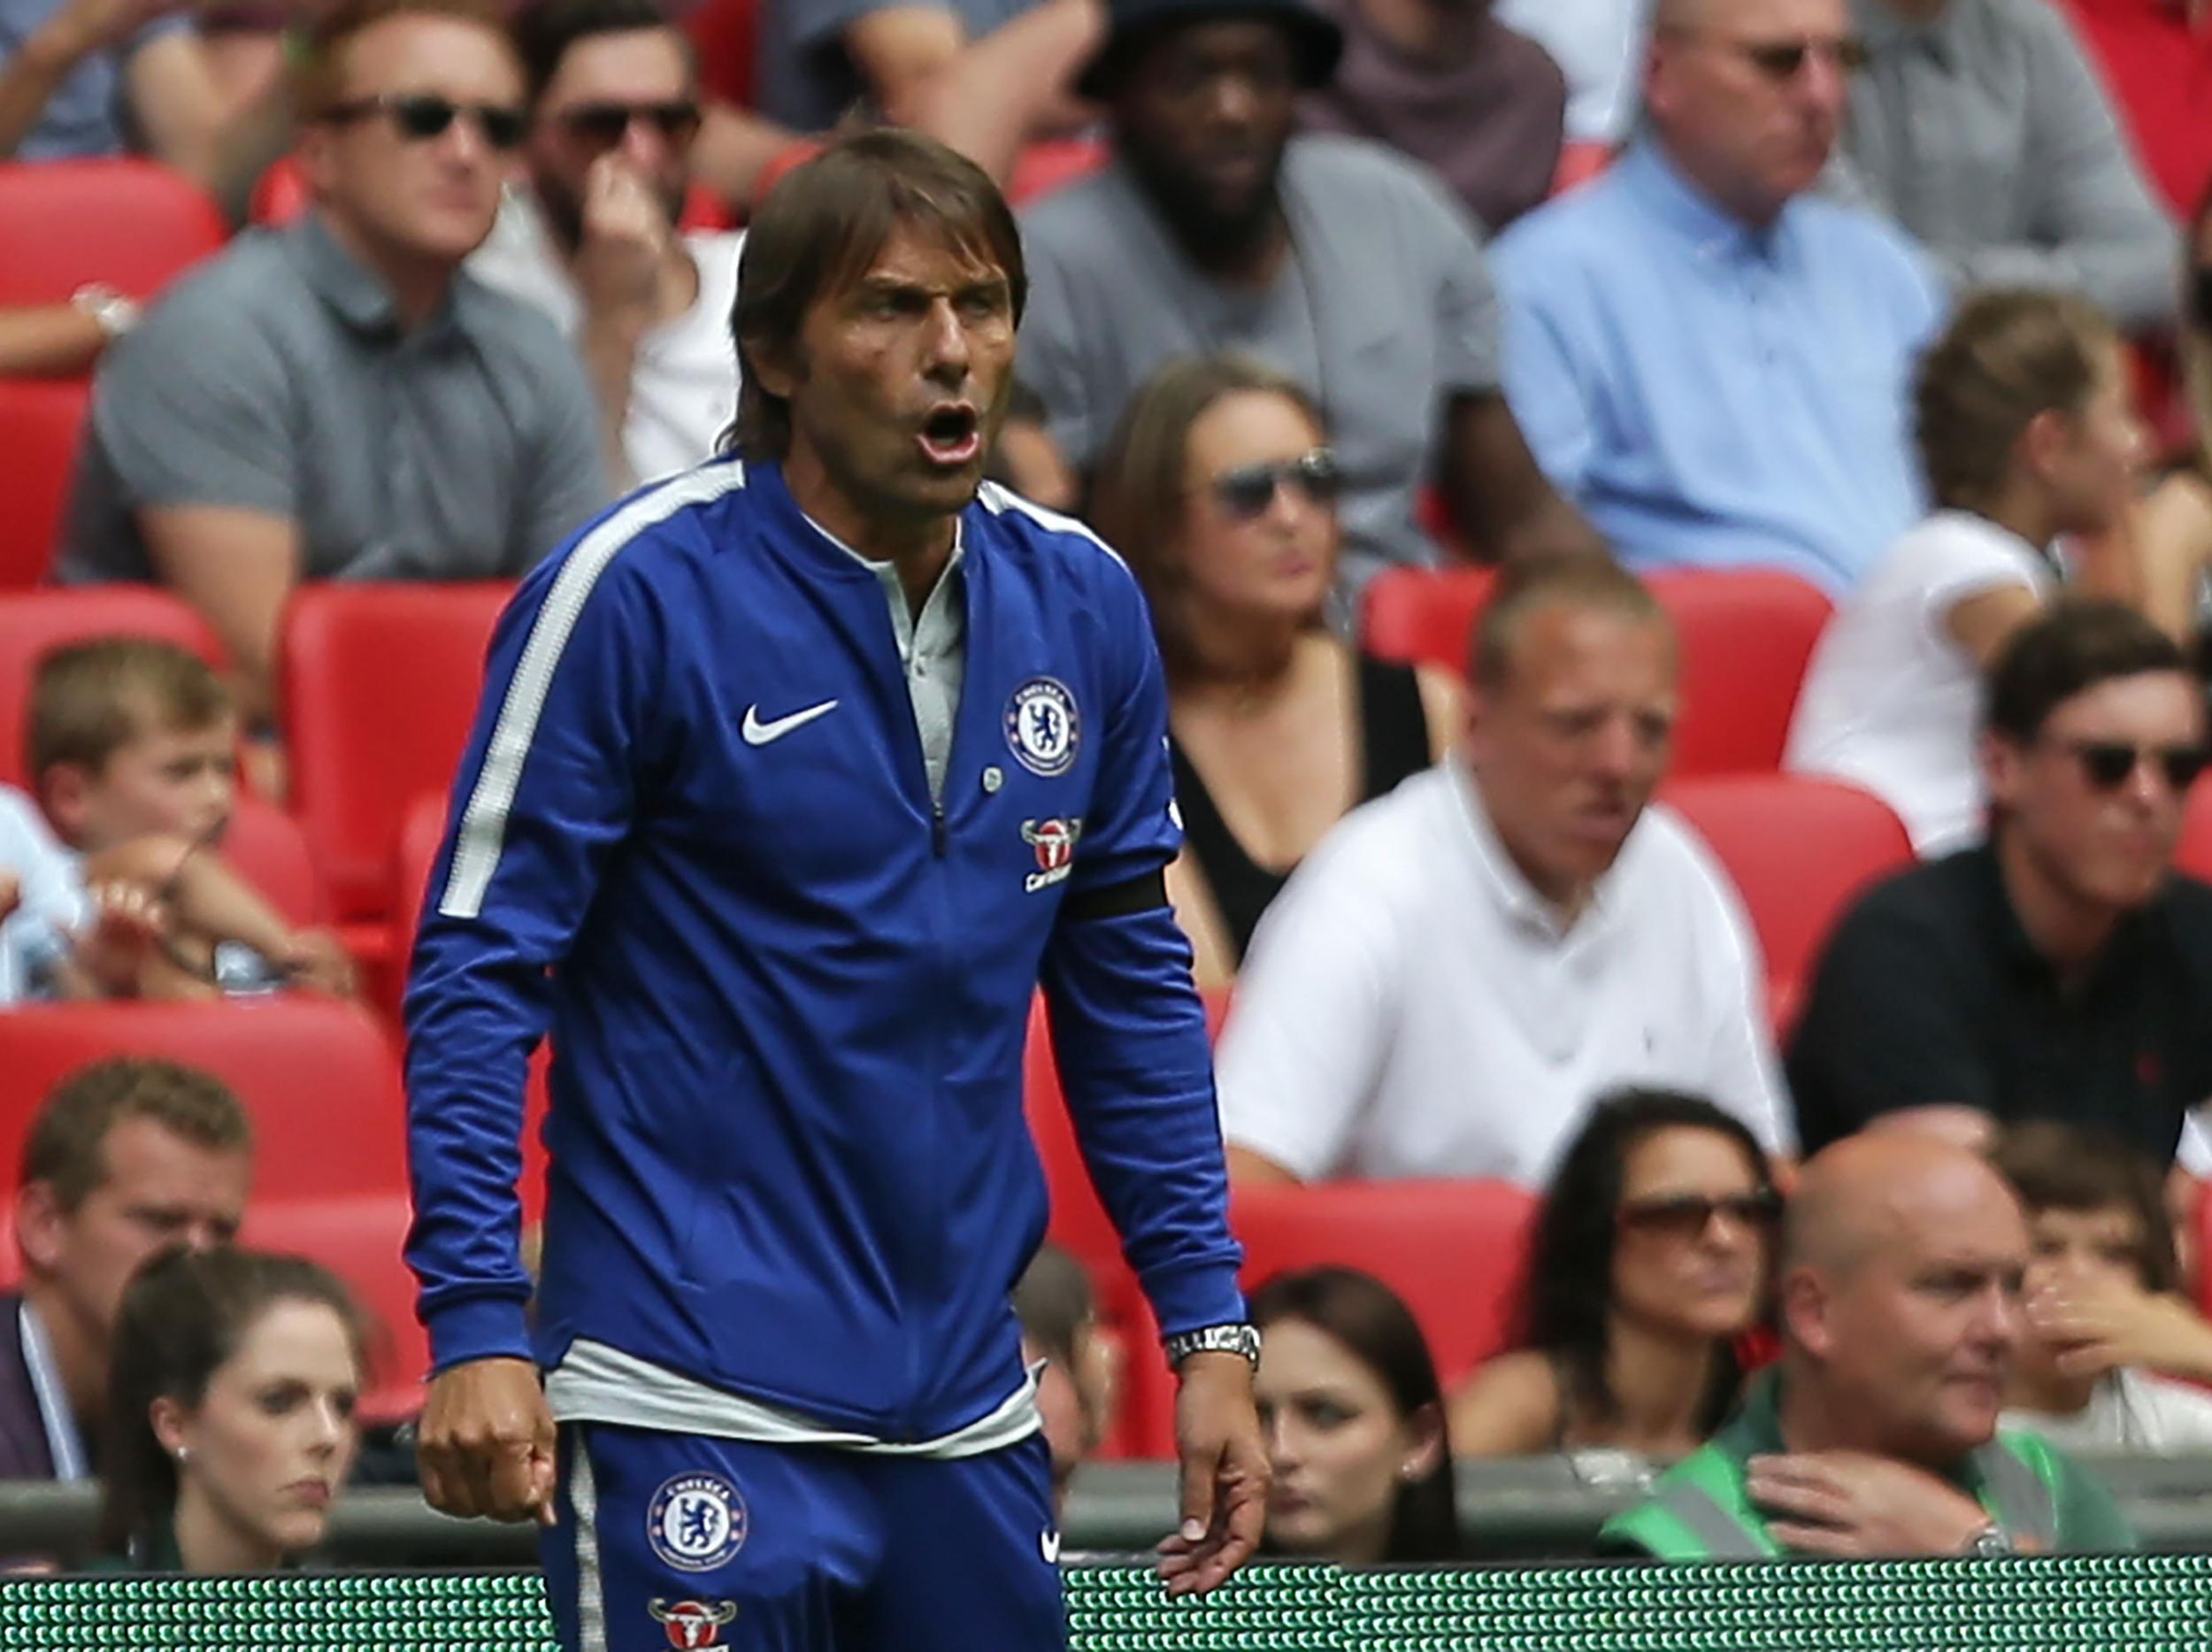 Antonio Conte has been frustrated by Chelsea's transfer business this summer